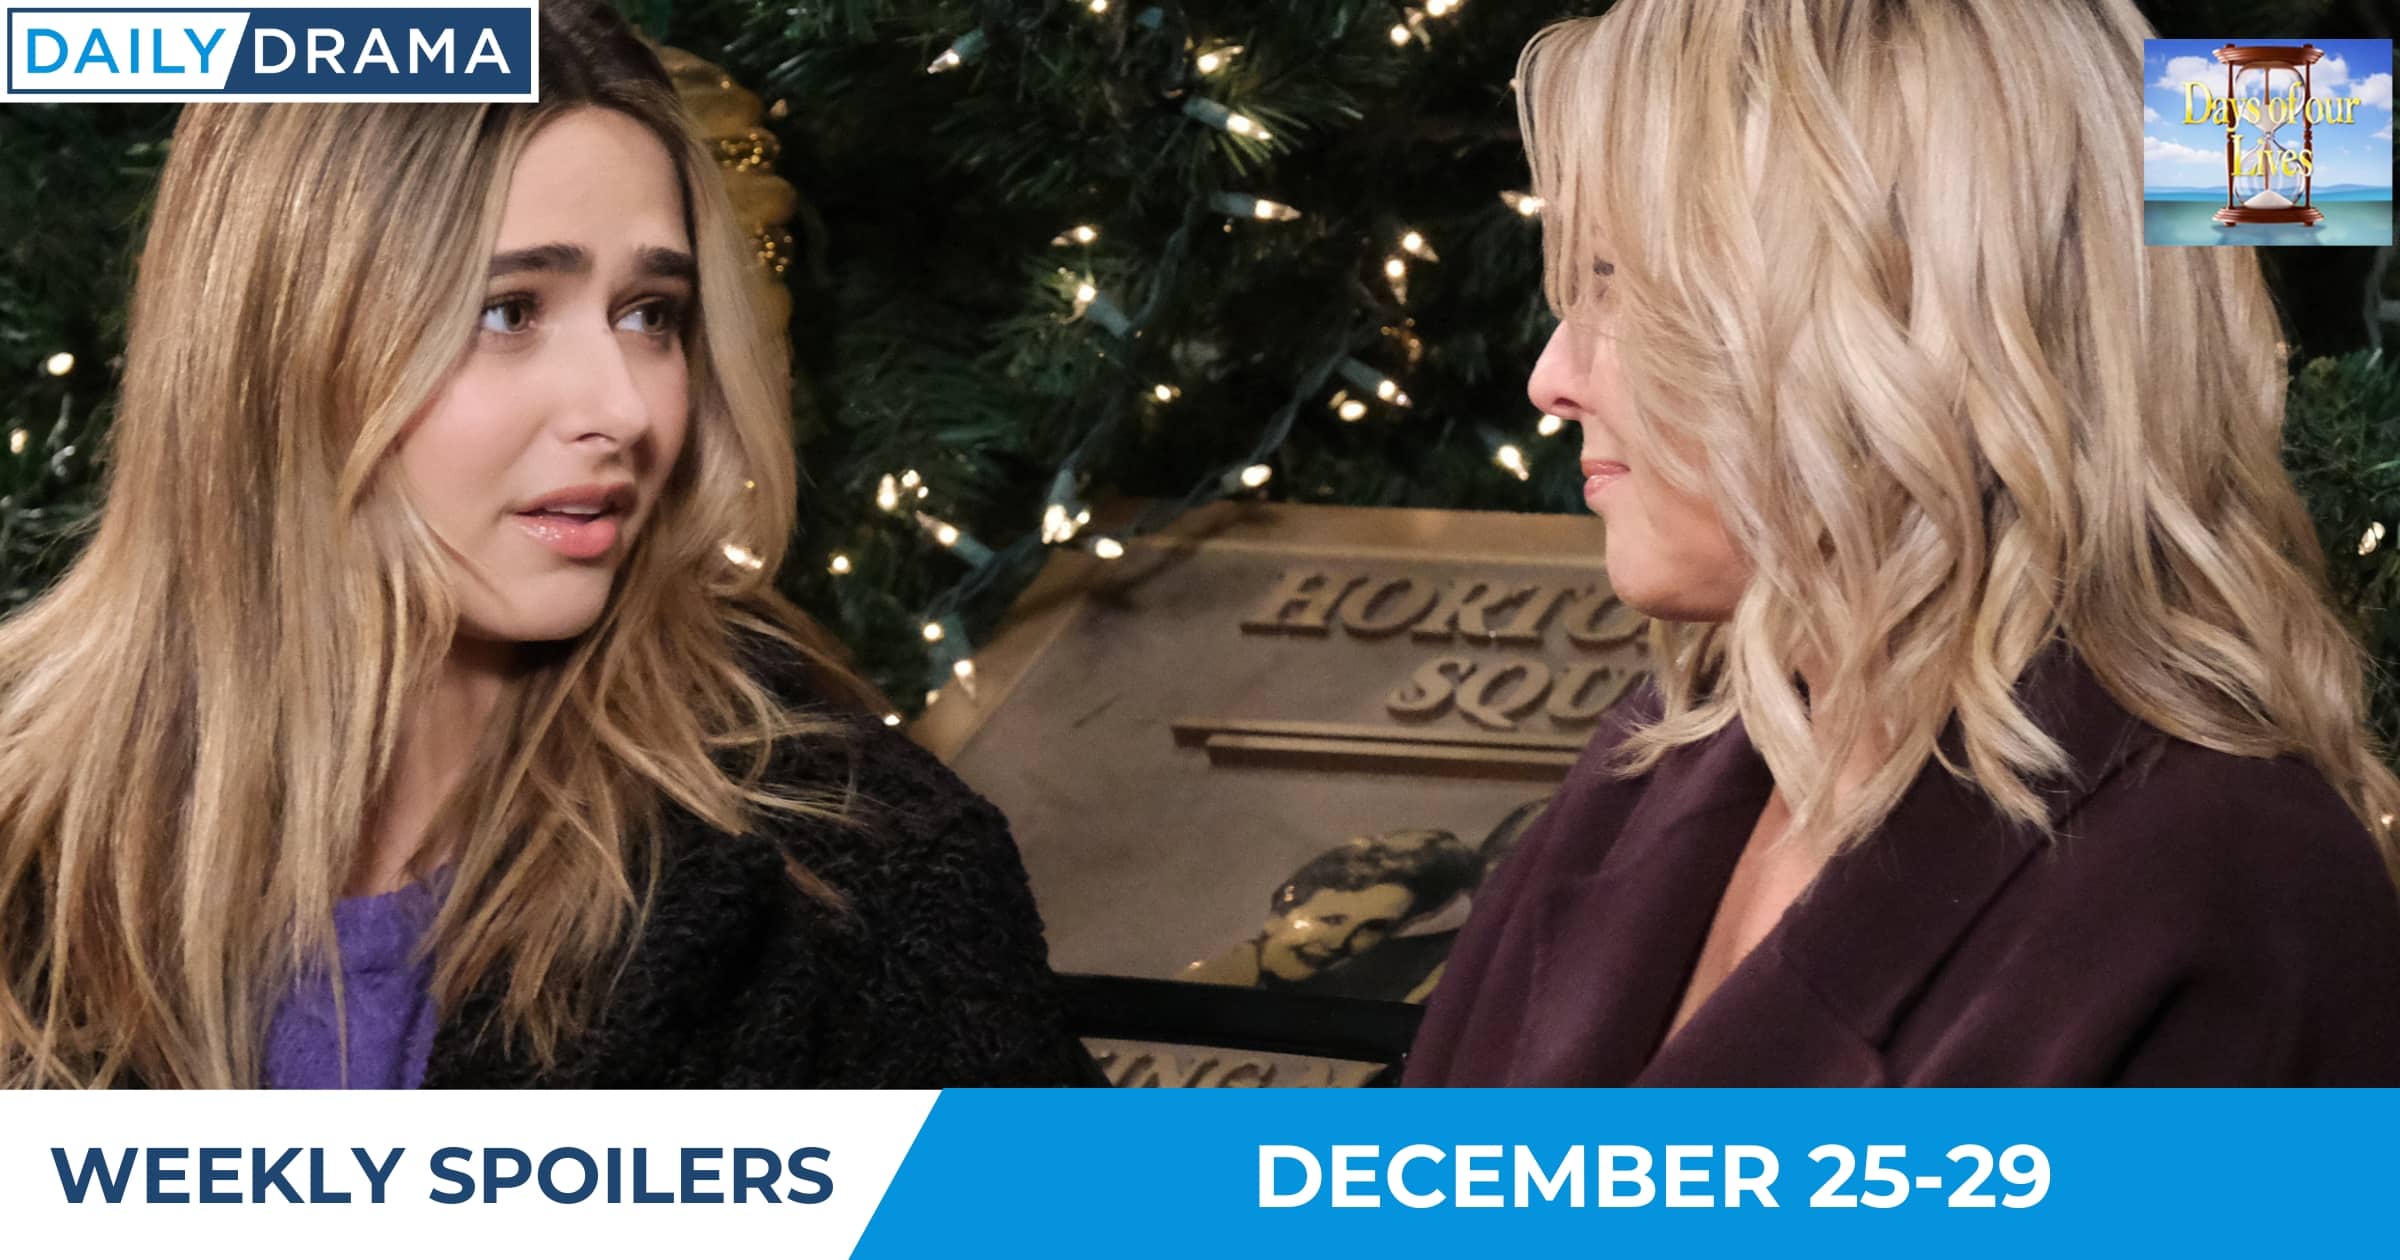 Days of Our Lives Weekly Spoilers - Dec 25-29 - Holly and Nicole